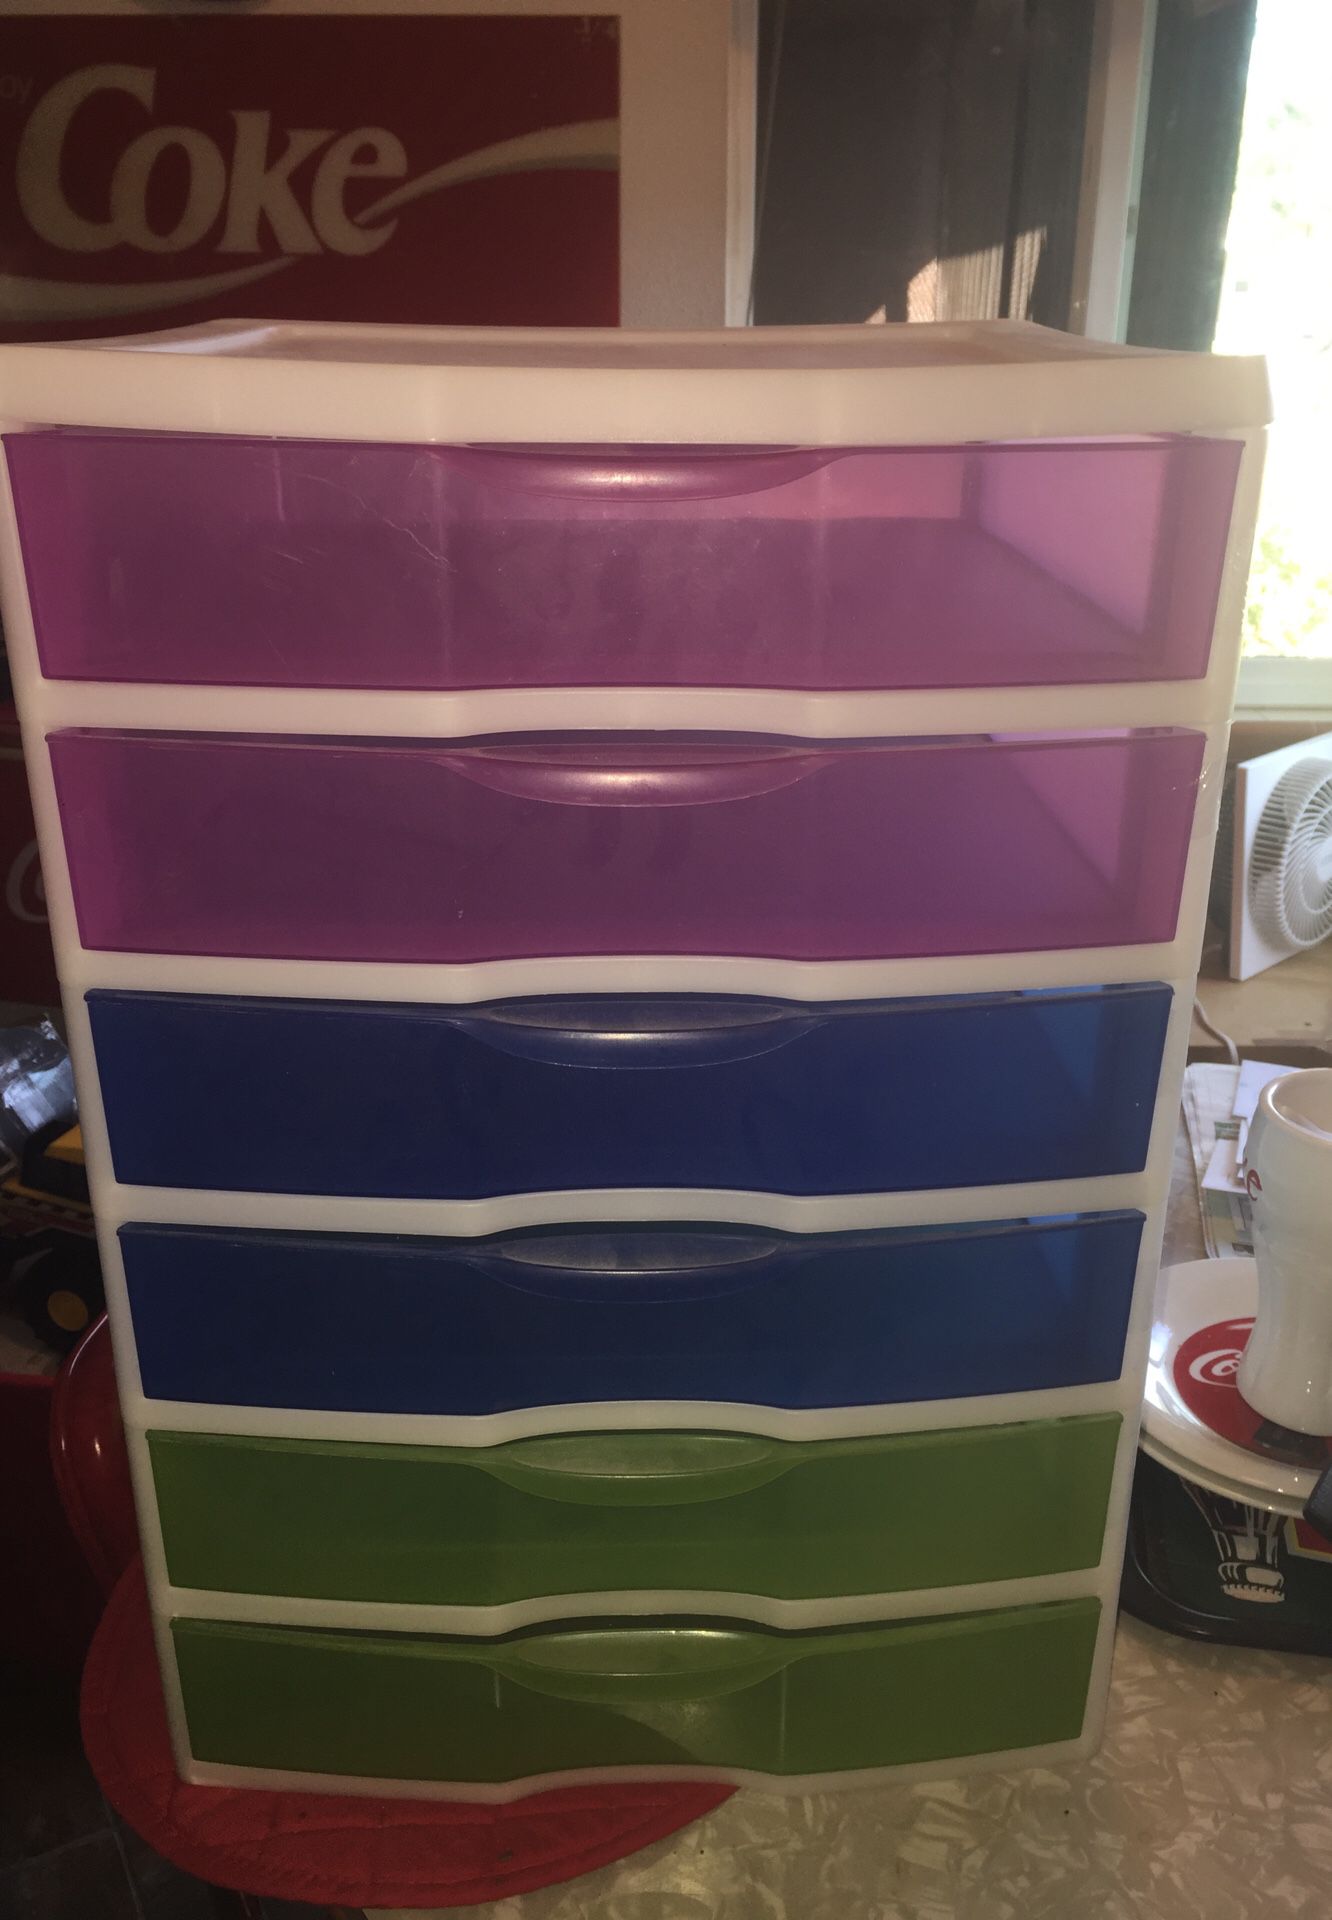 13”x21” 6 drawer organizer. Good condition drawers open with ease.